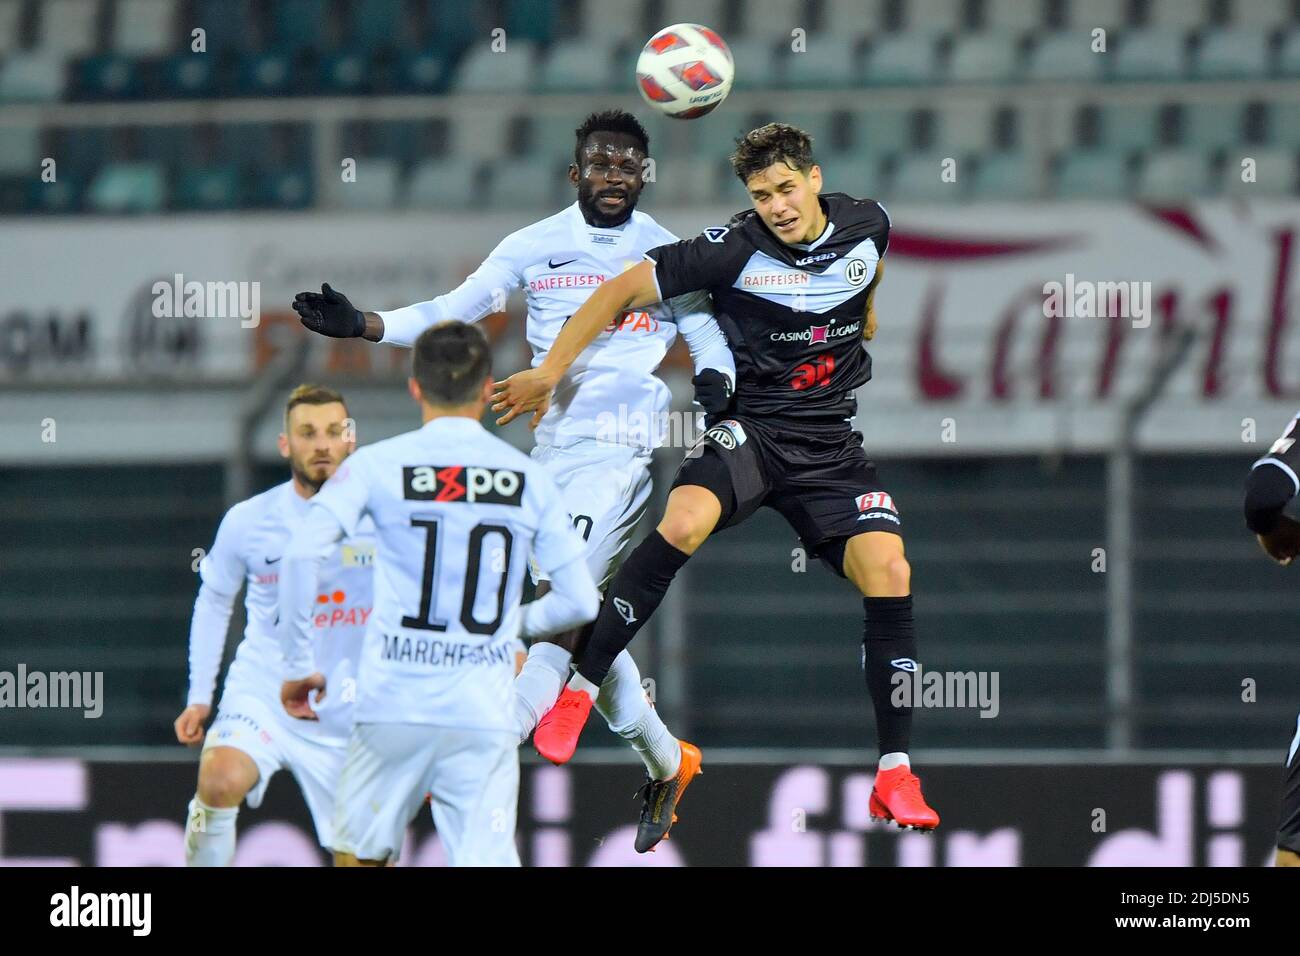 Lugano, Switzerland. 13th Dec, 2020. Ousmane Doumbia (#20 Zurich) and Stefano Guidotti (#22 FC Lugano) in action during the Swiss Super League match between FC Lugano and FC Zürich Cristiano Mazzi/SPP Credit: SPP Sport Press Photo. /Alamy Live News Stock Photo